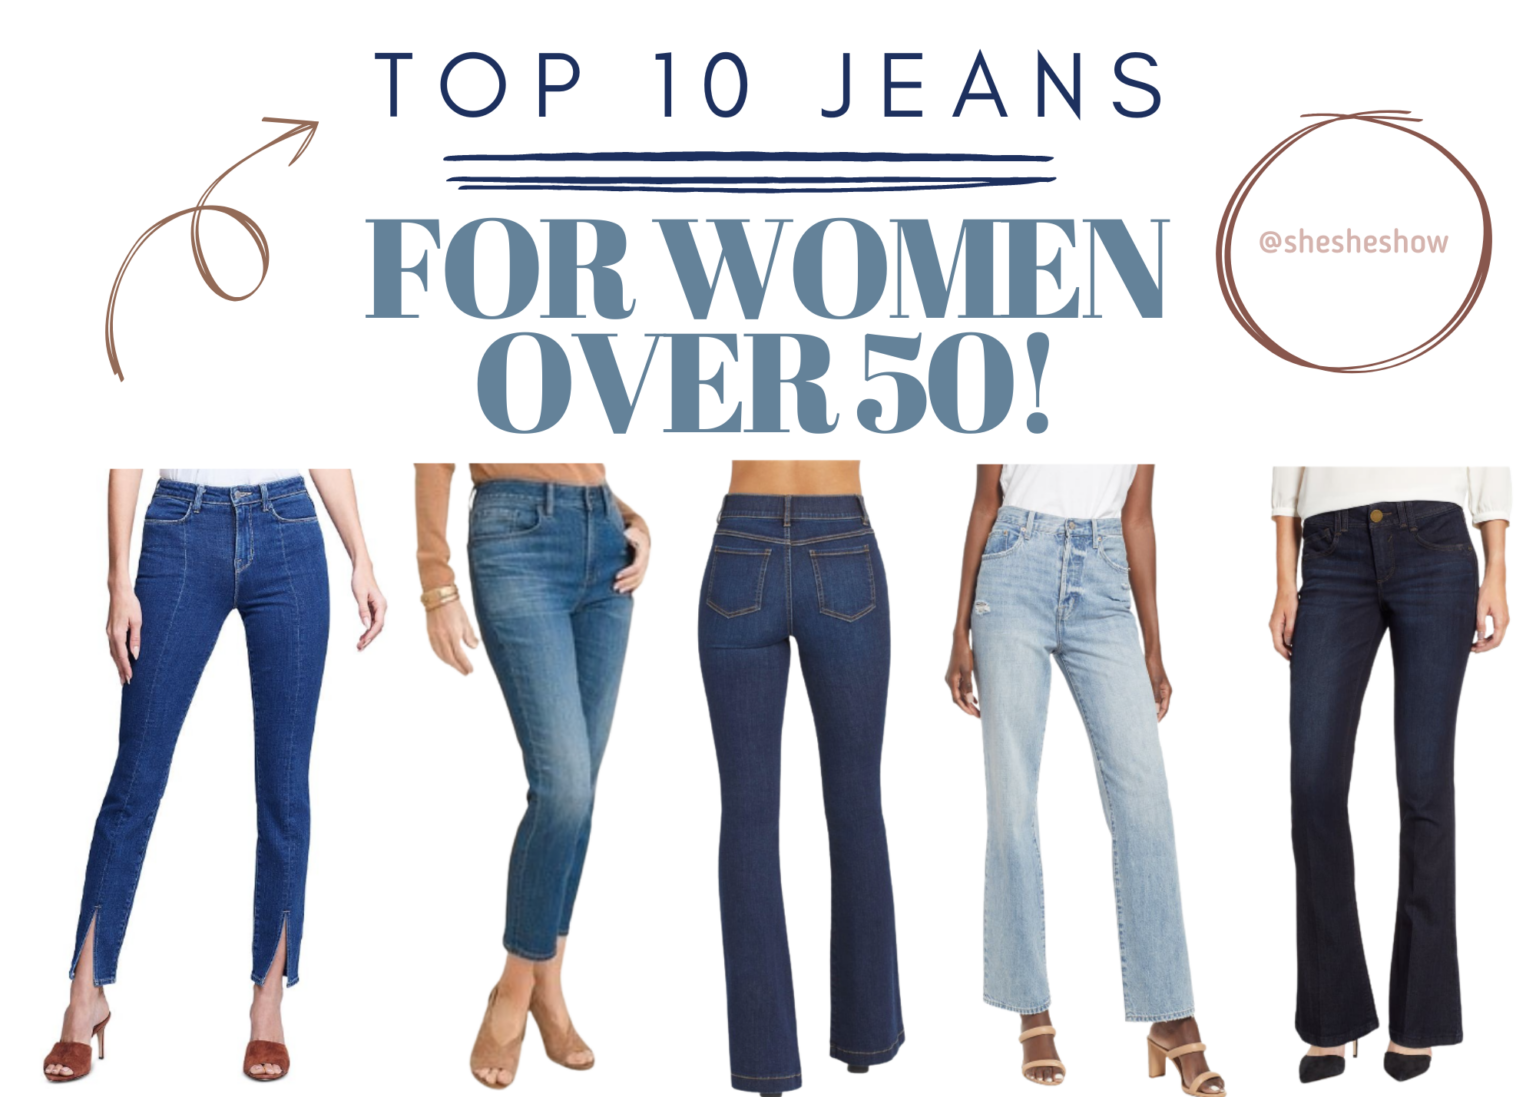 TOP 10 JEANS FOR WOMEN OVER 50 + TIPS - SheShe Show